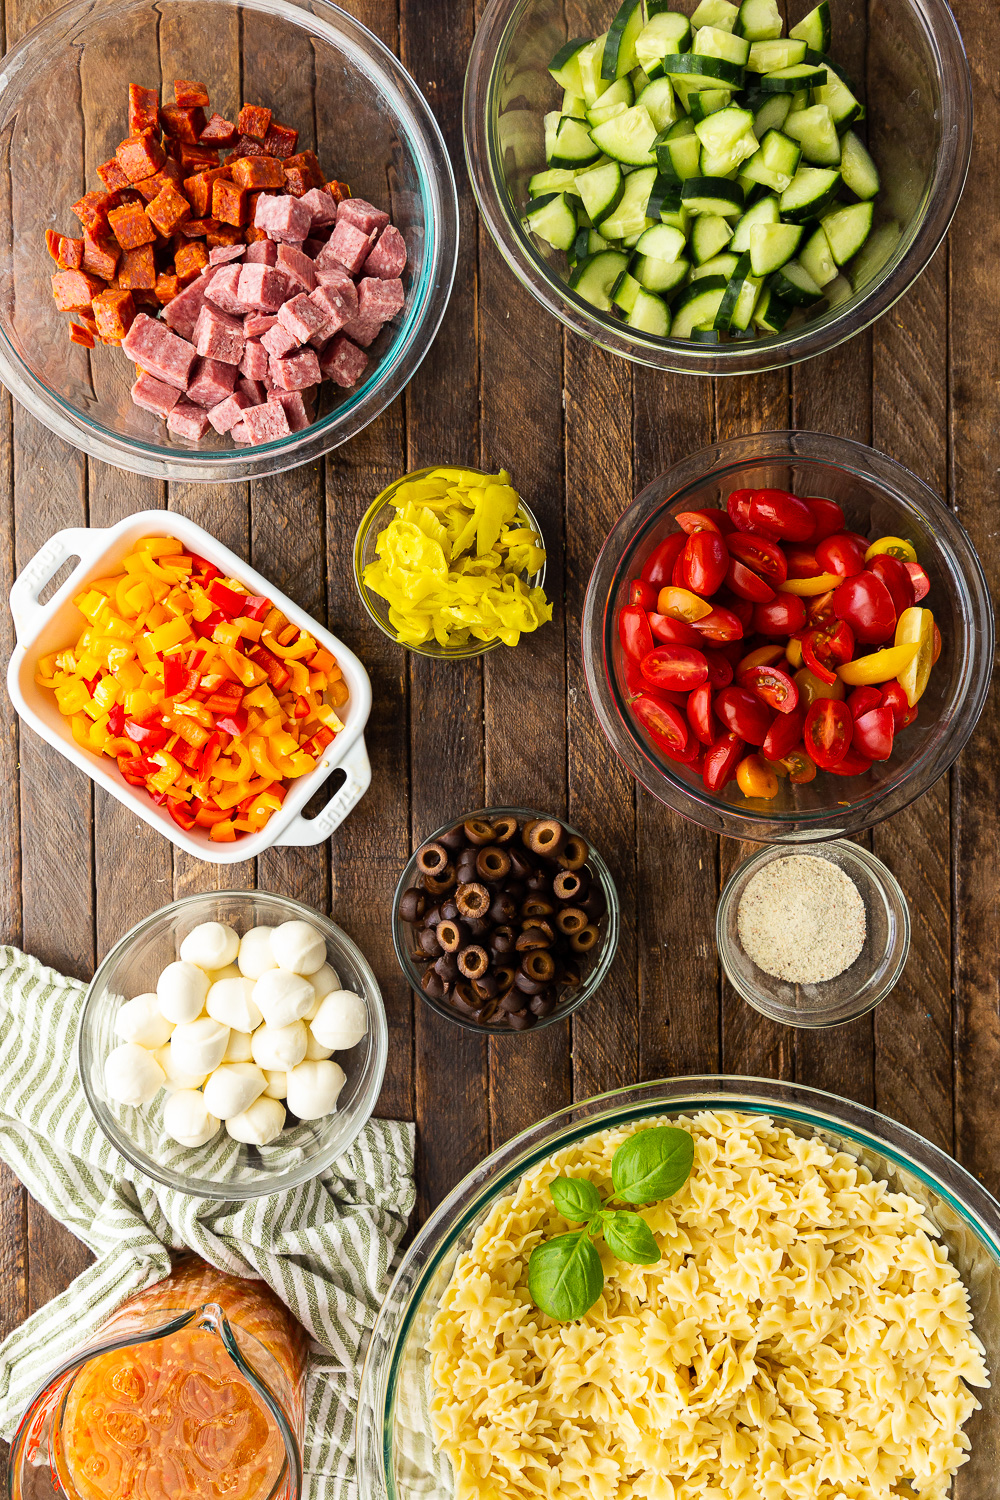 Ingredients for an easy pasta salad that is sure to be a hit